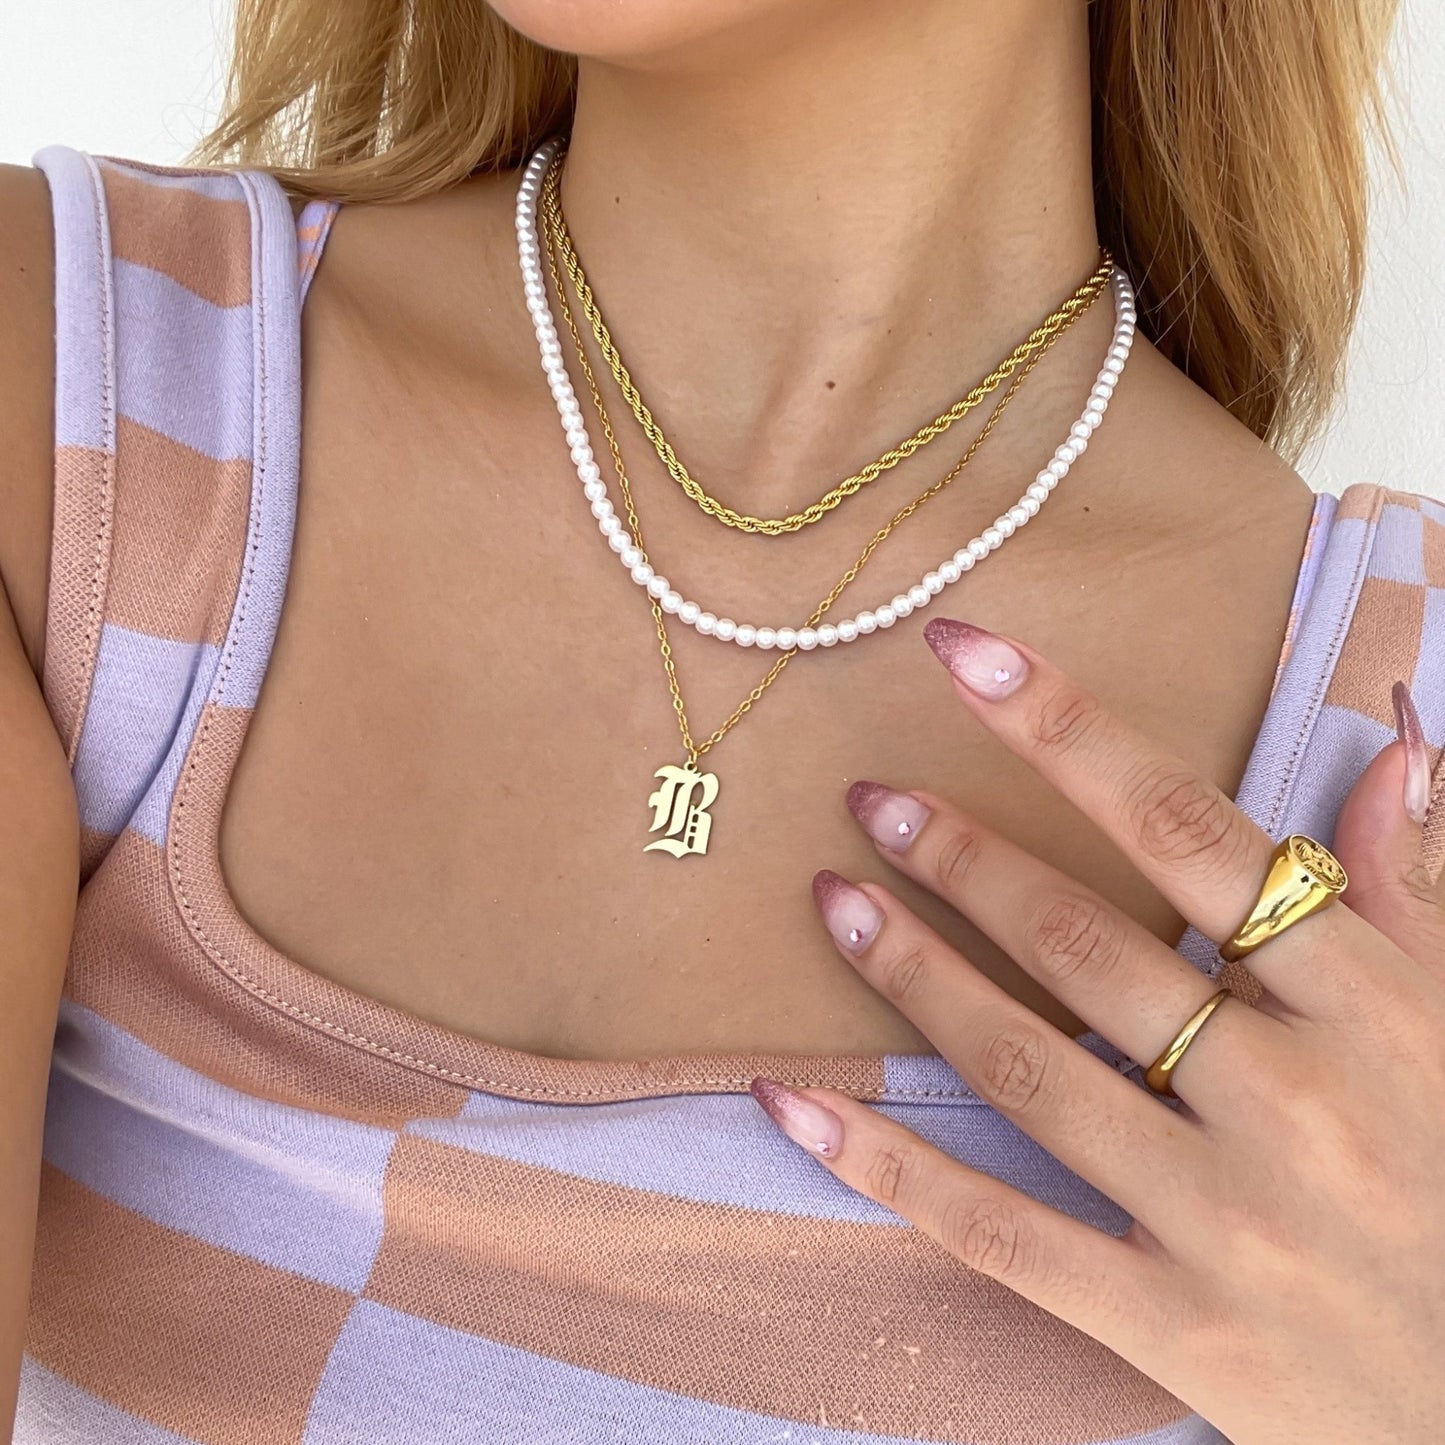 B perl necklace(3セット) - 𝐇𝐨𝐧𝐞𝐲 𝐁𝐮𝐭𝐭𝐞𝐫 𝐍𝐢𝐧𝐞